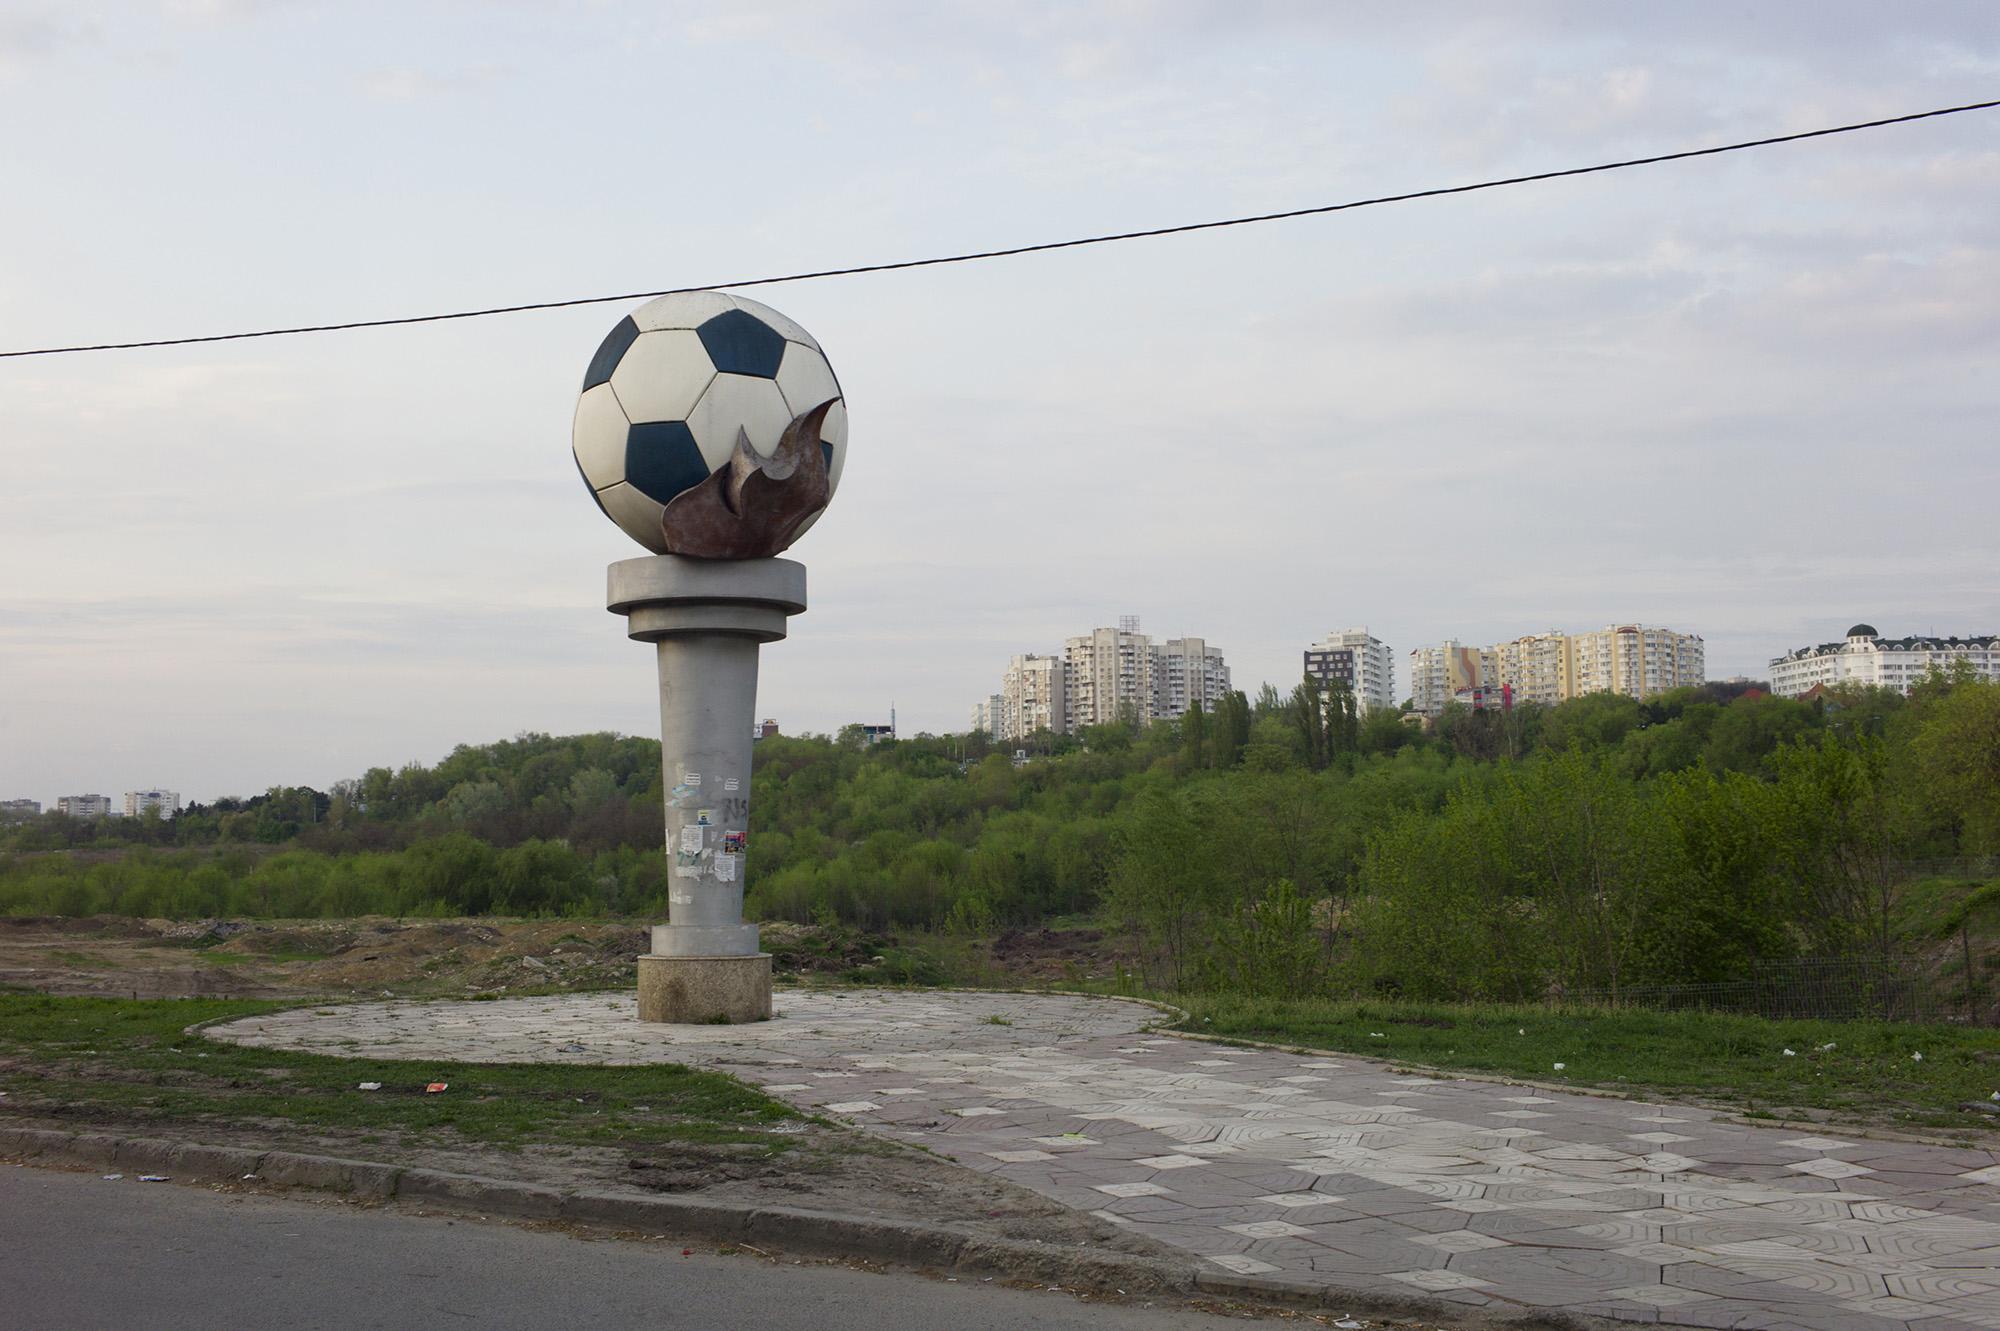 Republic of Moldova / Chisinau / Near the circus in Chisinau is a monument with a football which was built when in the area the construction of a new sport arena was planned. The old, architecturally intresting Republican stadium of the city had then already been demolished (in 2007), but even after other two different plots were assigned and many promising stadium projects, the ball is still on the pedestal, but no new stadium has yet seen the light anywhere in and around Chisinau.